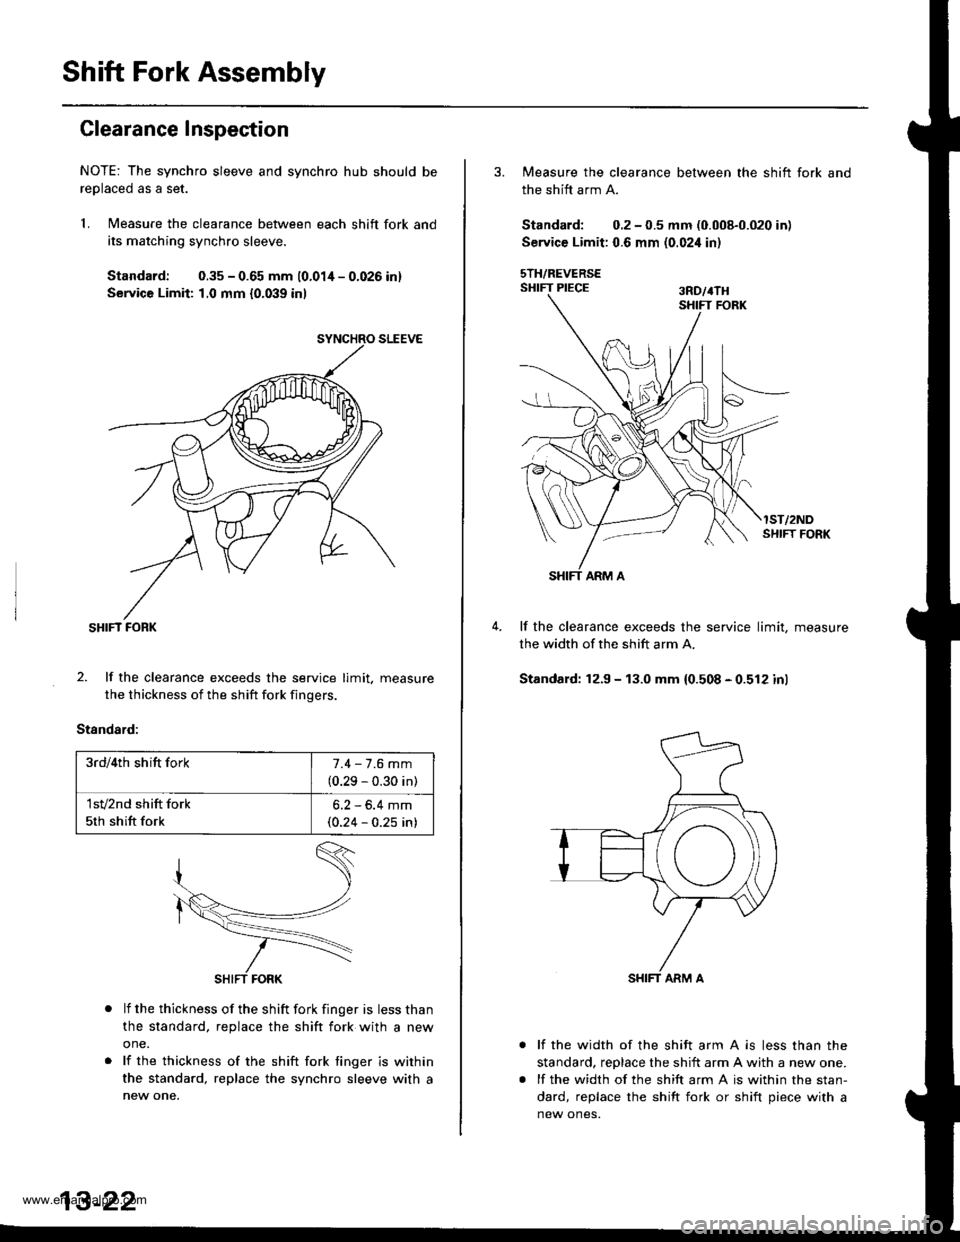 HONDA CR-V 1999 RD1-RD3 / 1.G Workshop Manual 
Shift Fork Assembly
Clearance Inspection
NOTE: The synchro sleeve and synchro hub should be
reolaced as a set.
1. Measure the clearance between each shift fork and
its matching synchro sleeve.
Standa